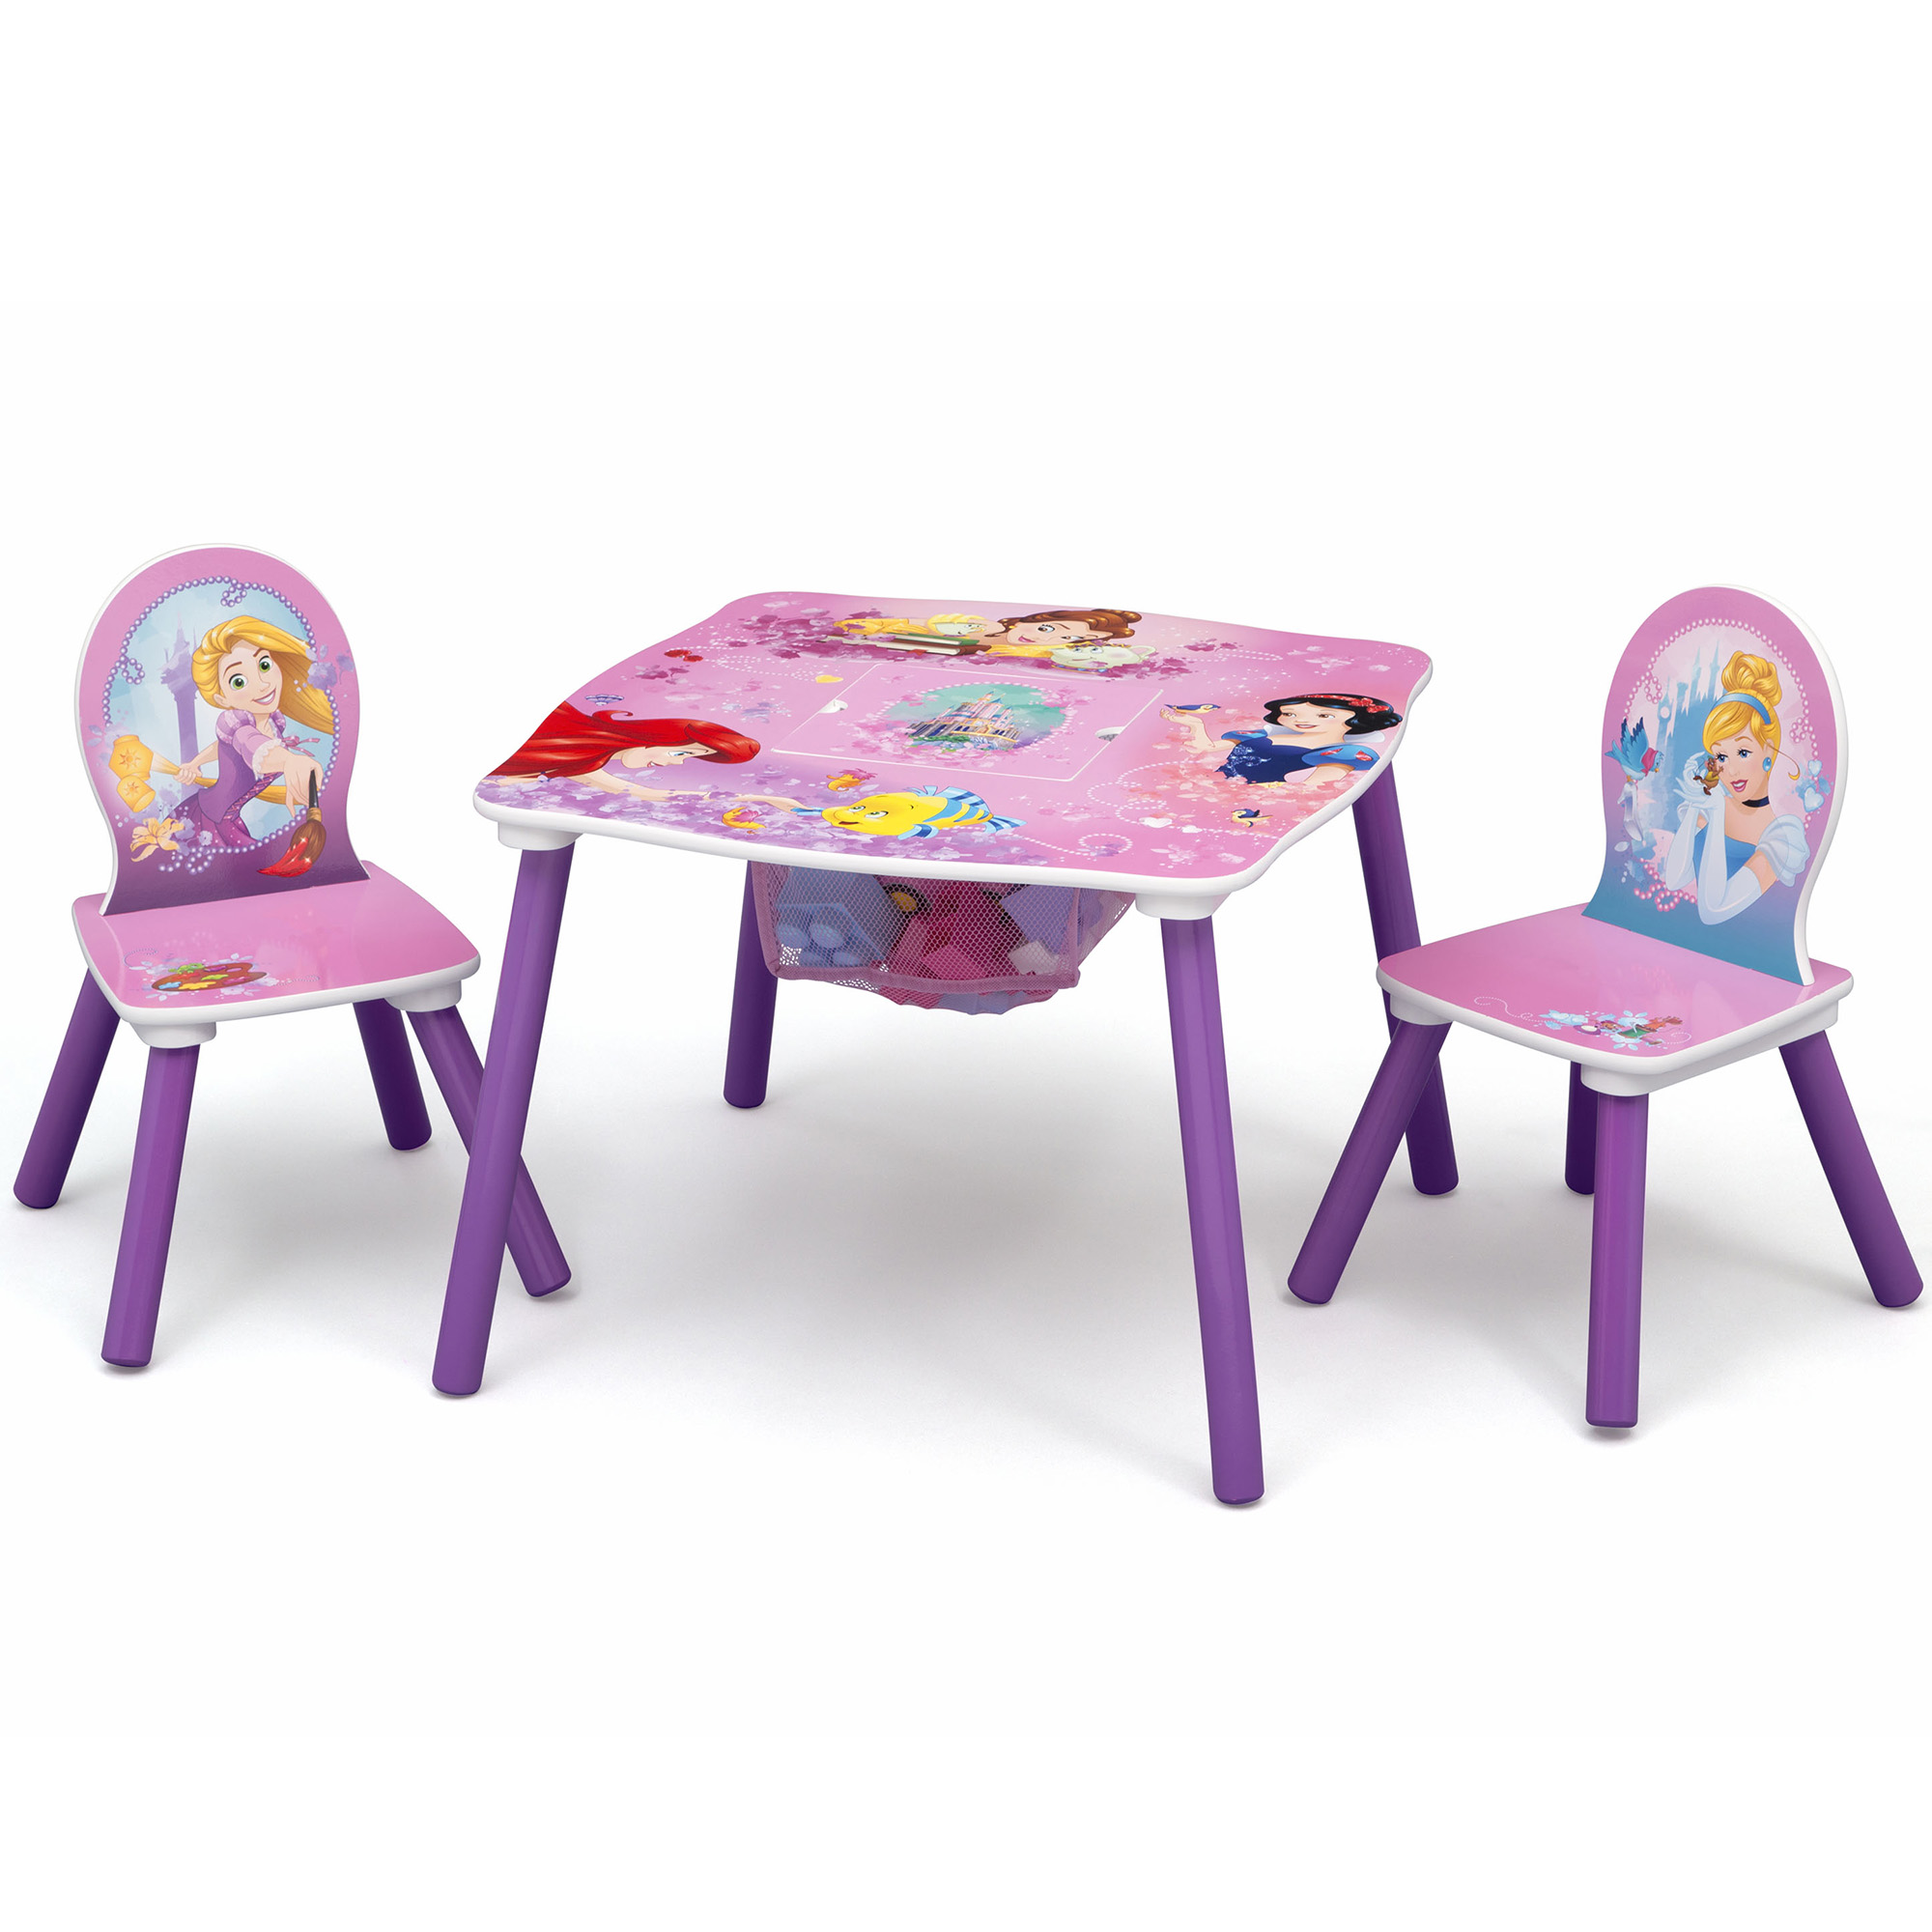 Disney Princess Wood Kids Table and Chair Set with Storage by Delta Children - image 4 of 8